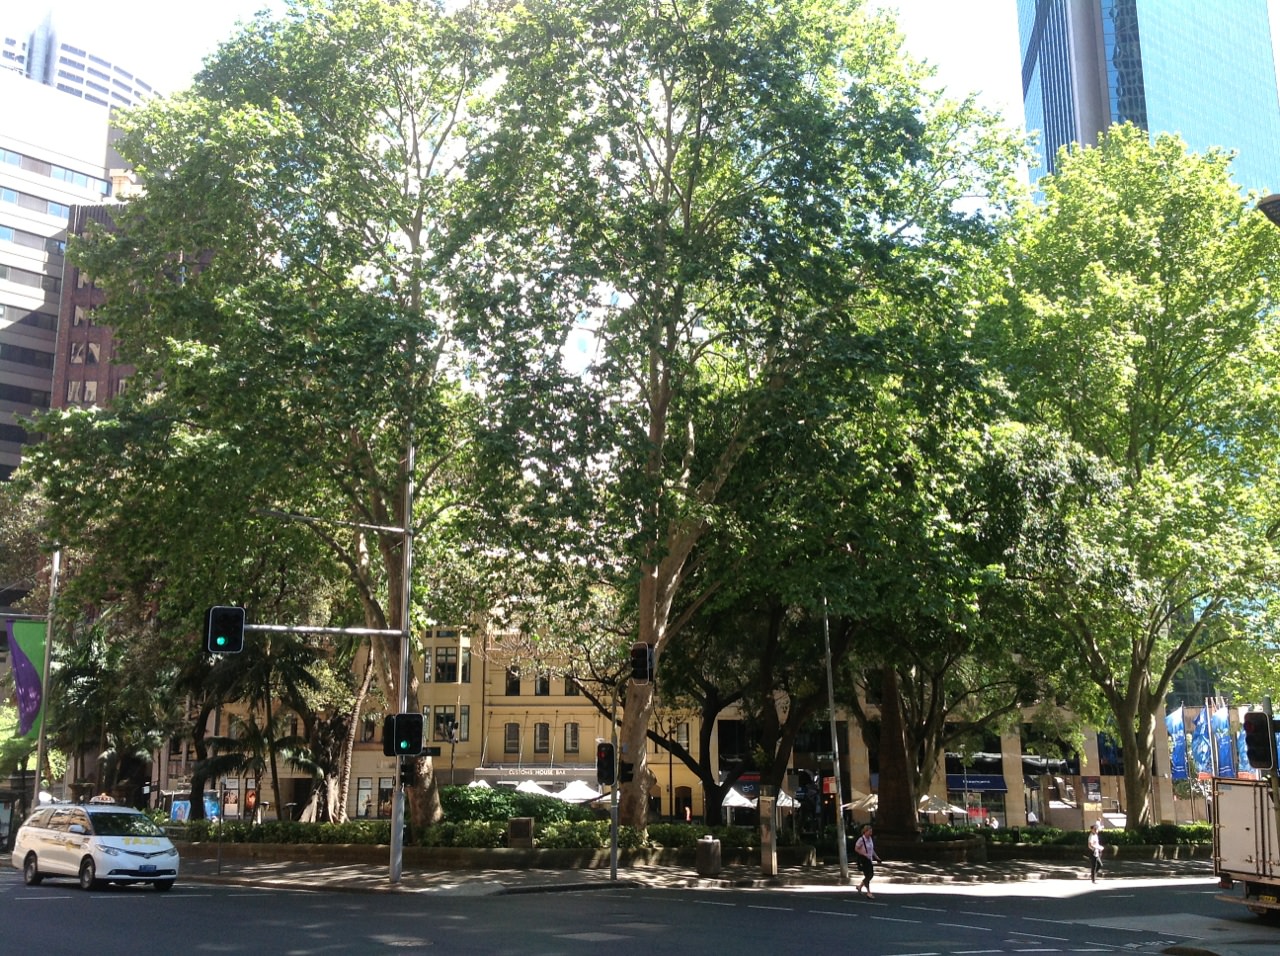 London plane trees to remain in city’s canopy despite health risks